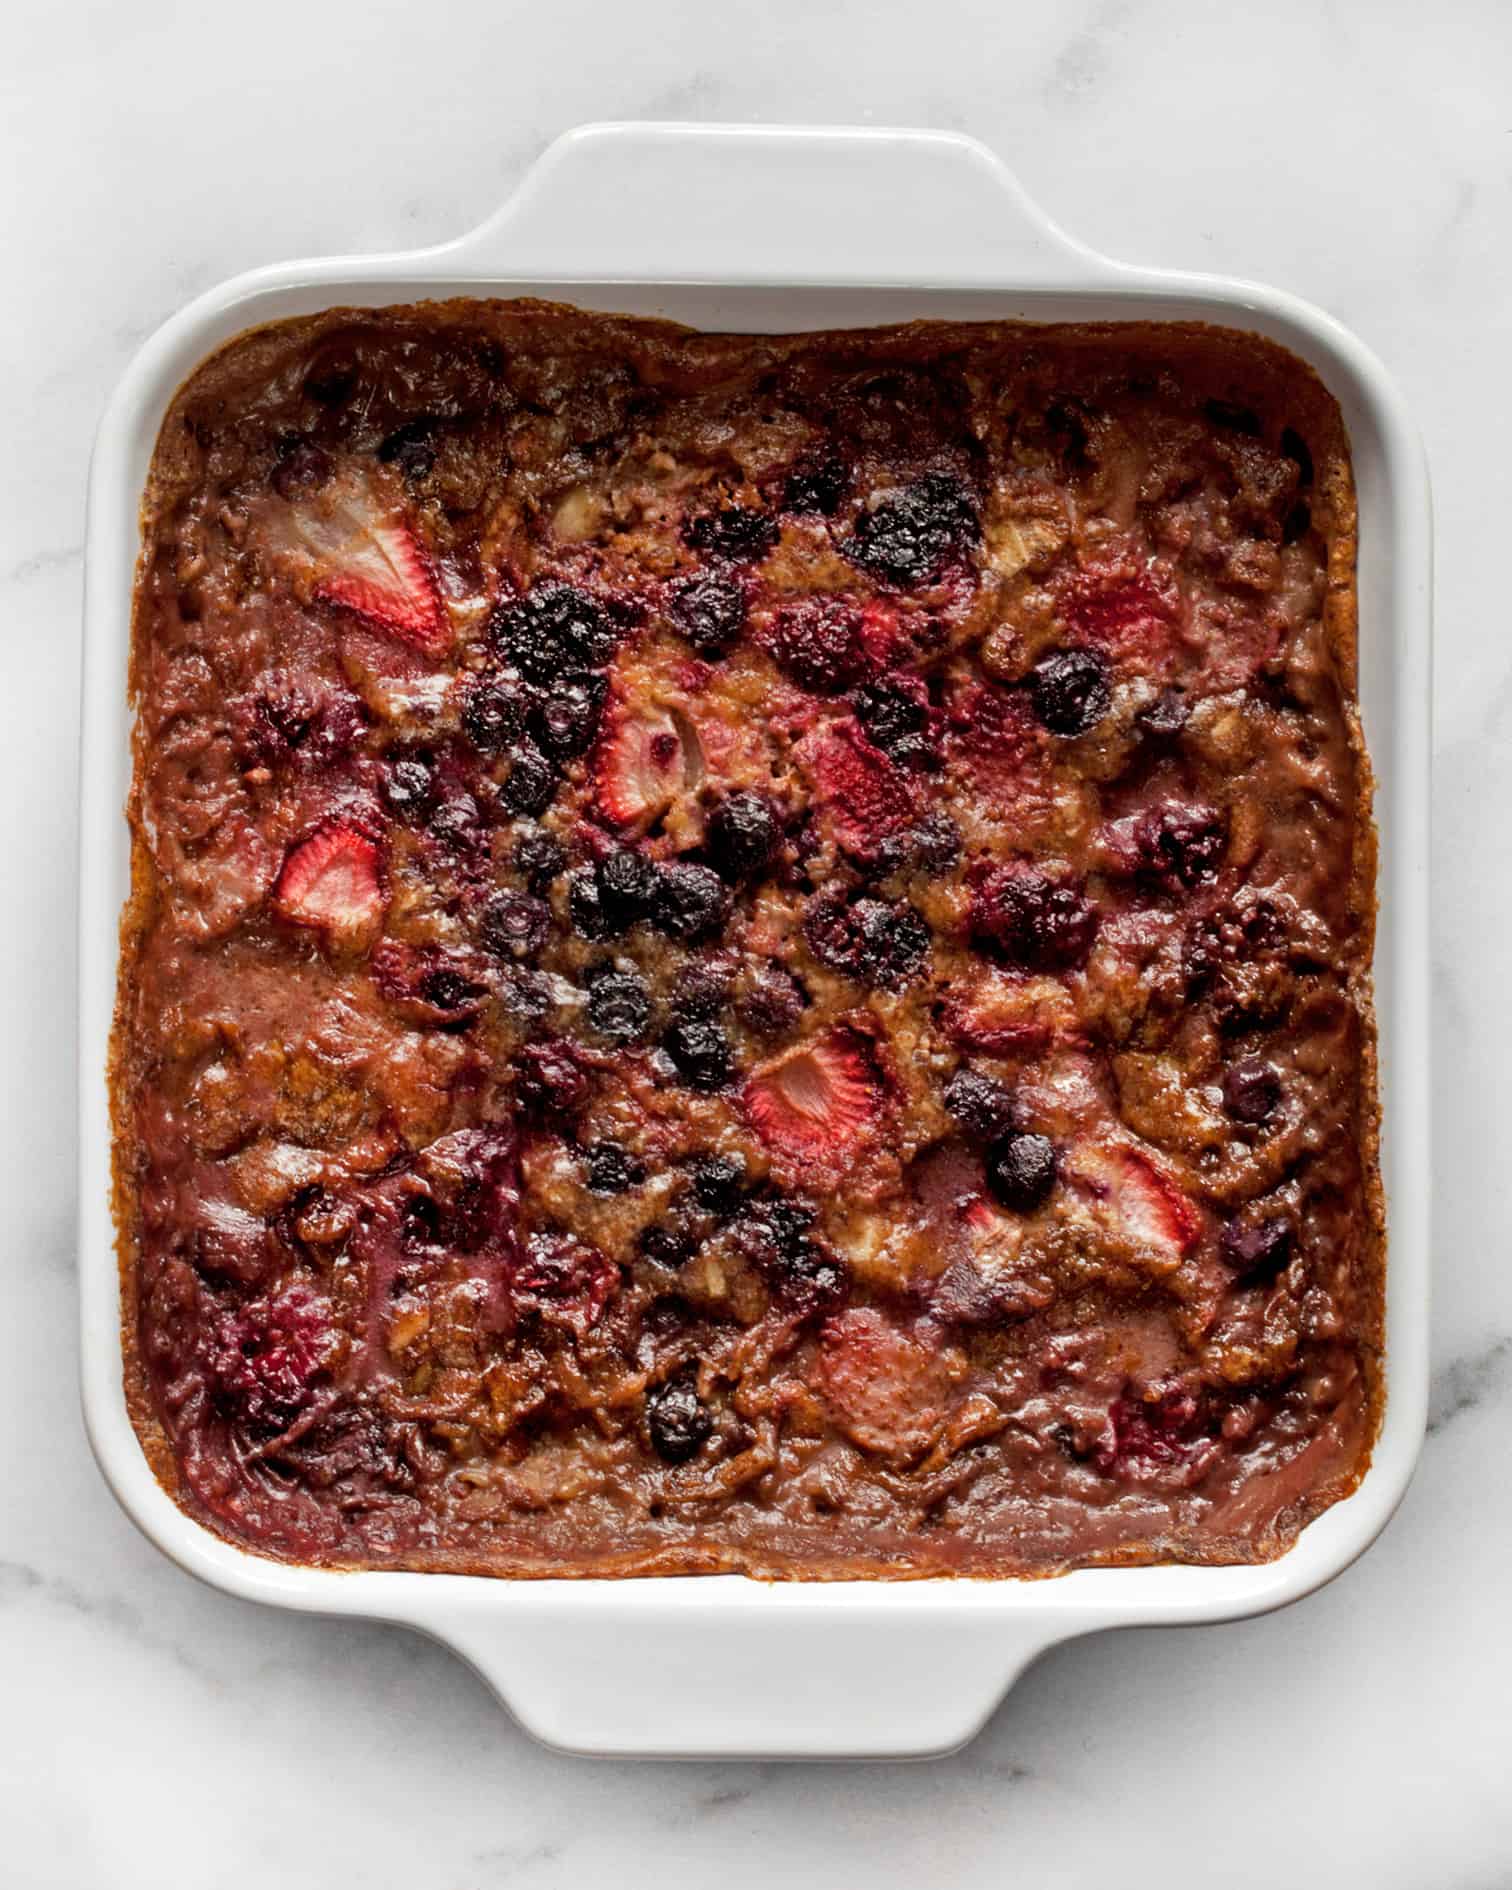 Baked oatmeal in the dish